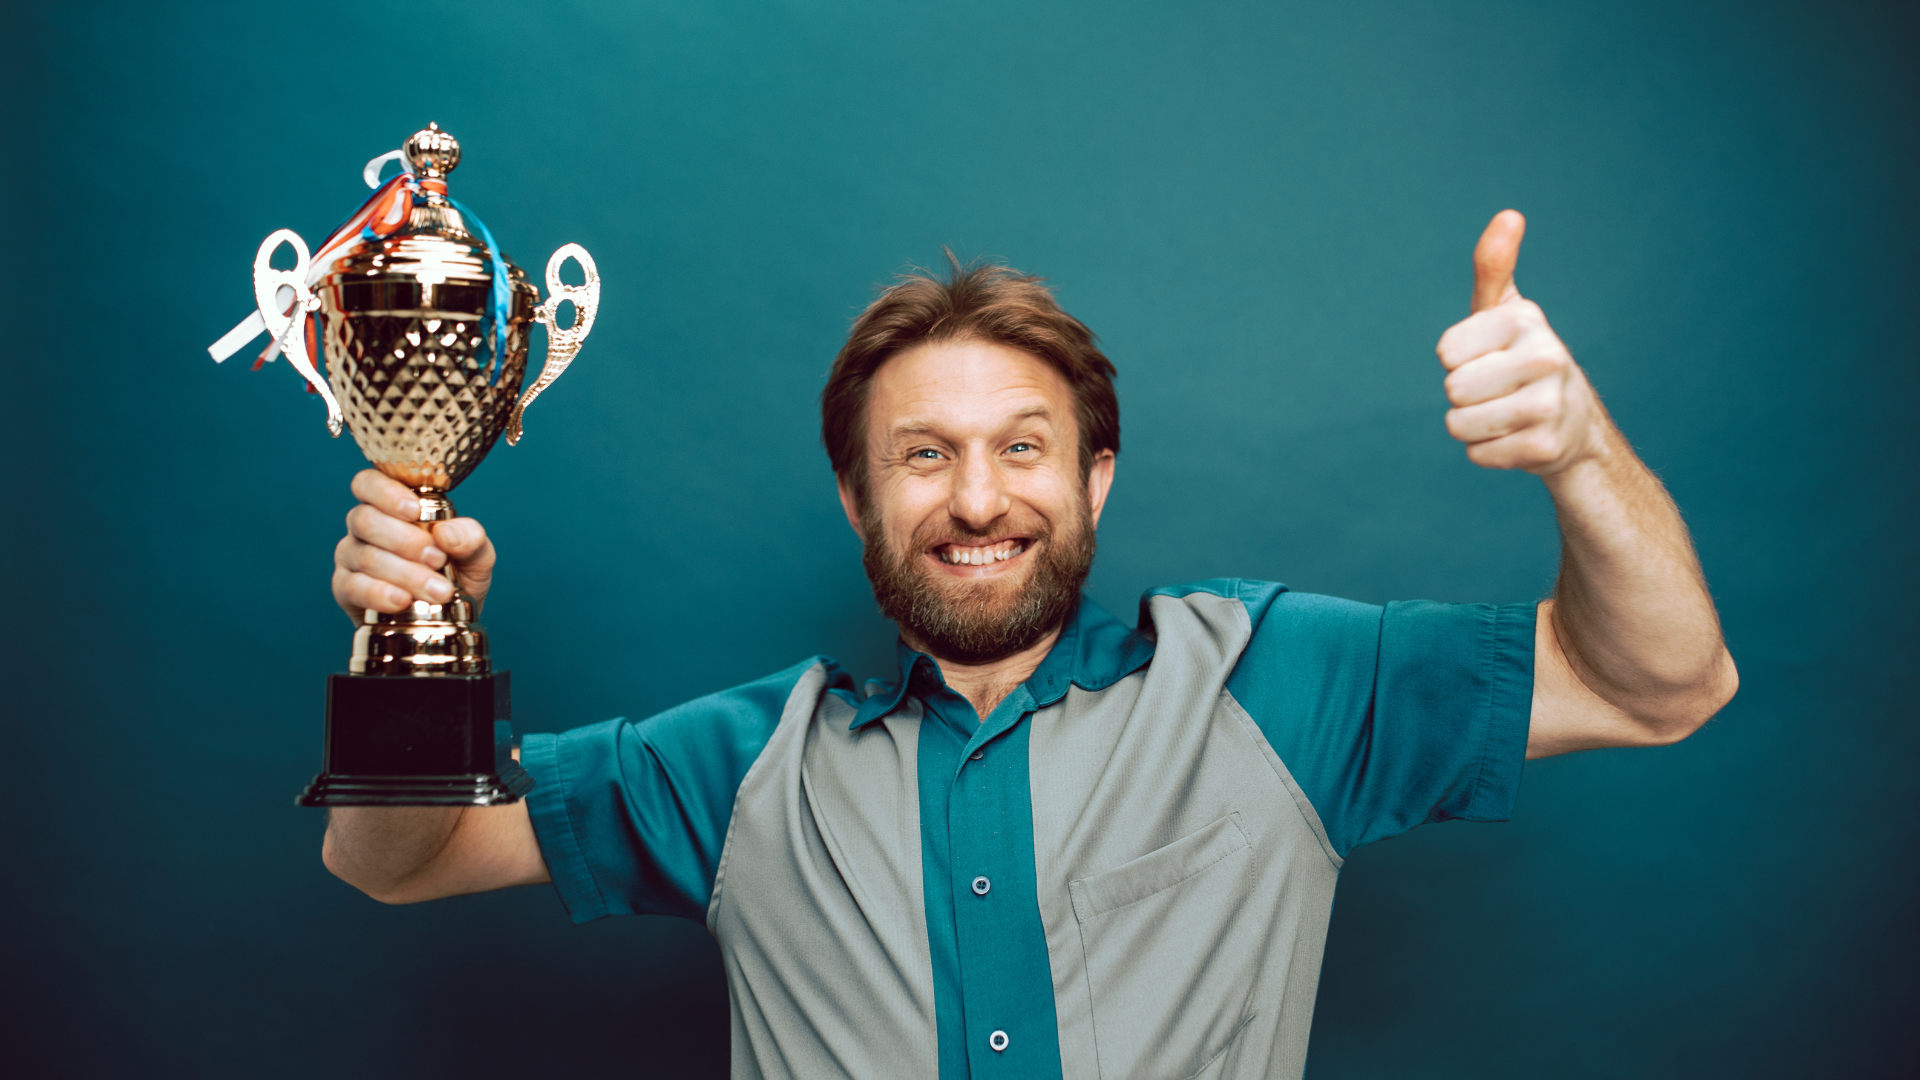 A man is happily holding his winning award for his accomplishments.